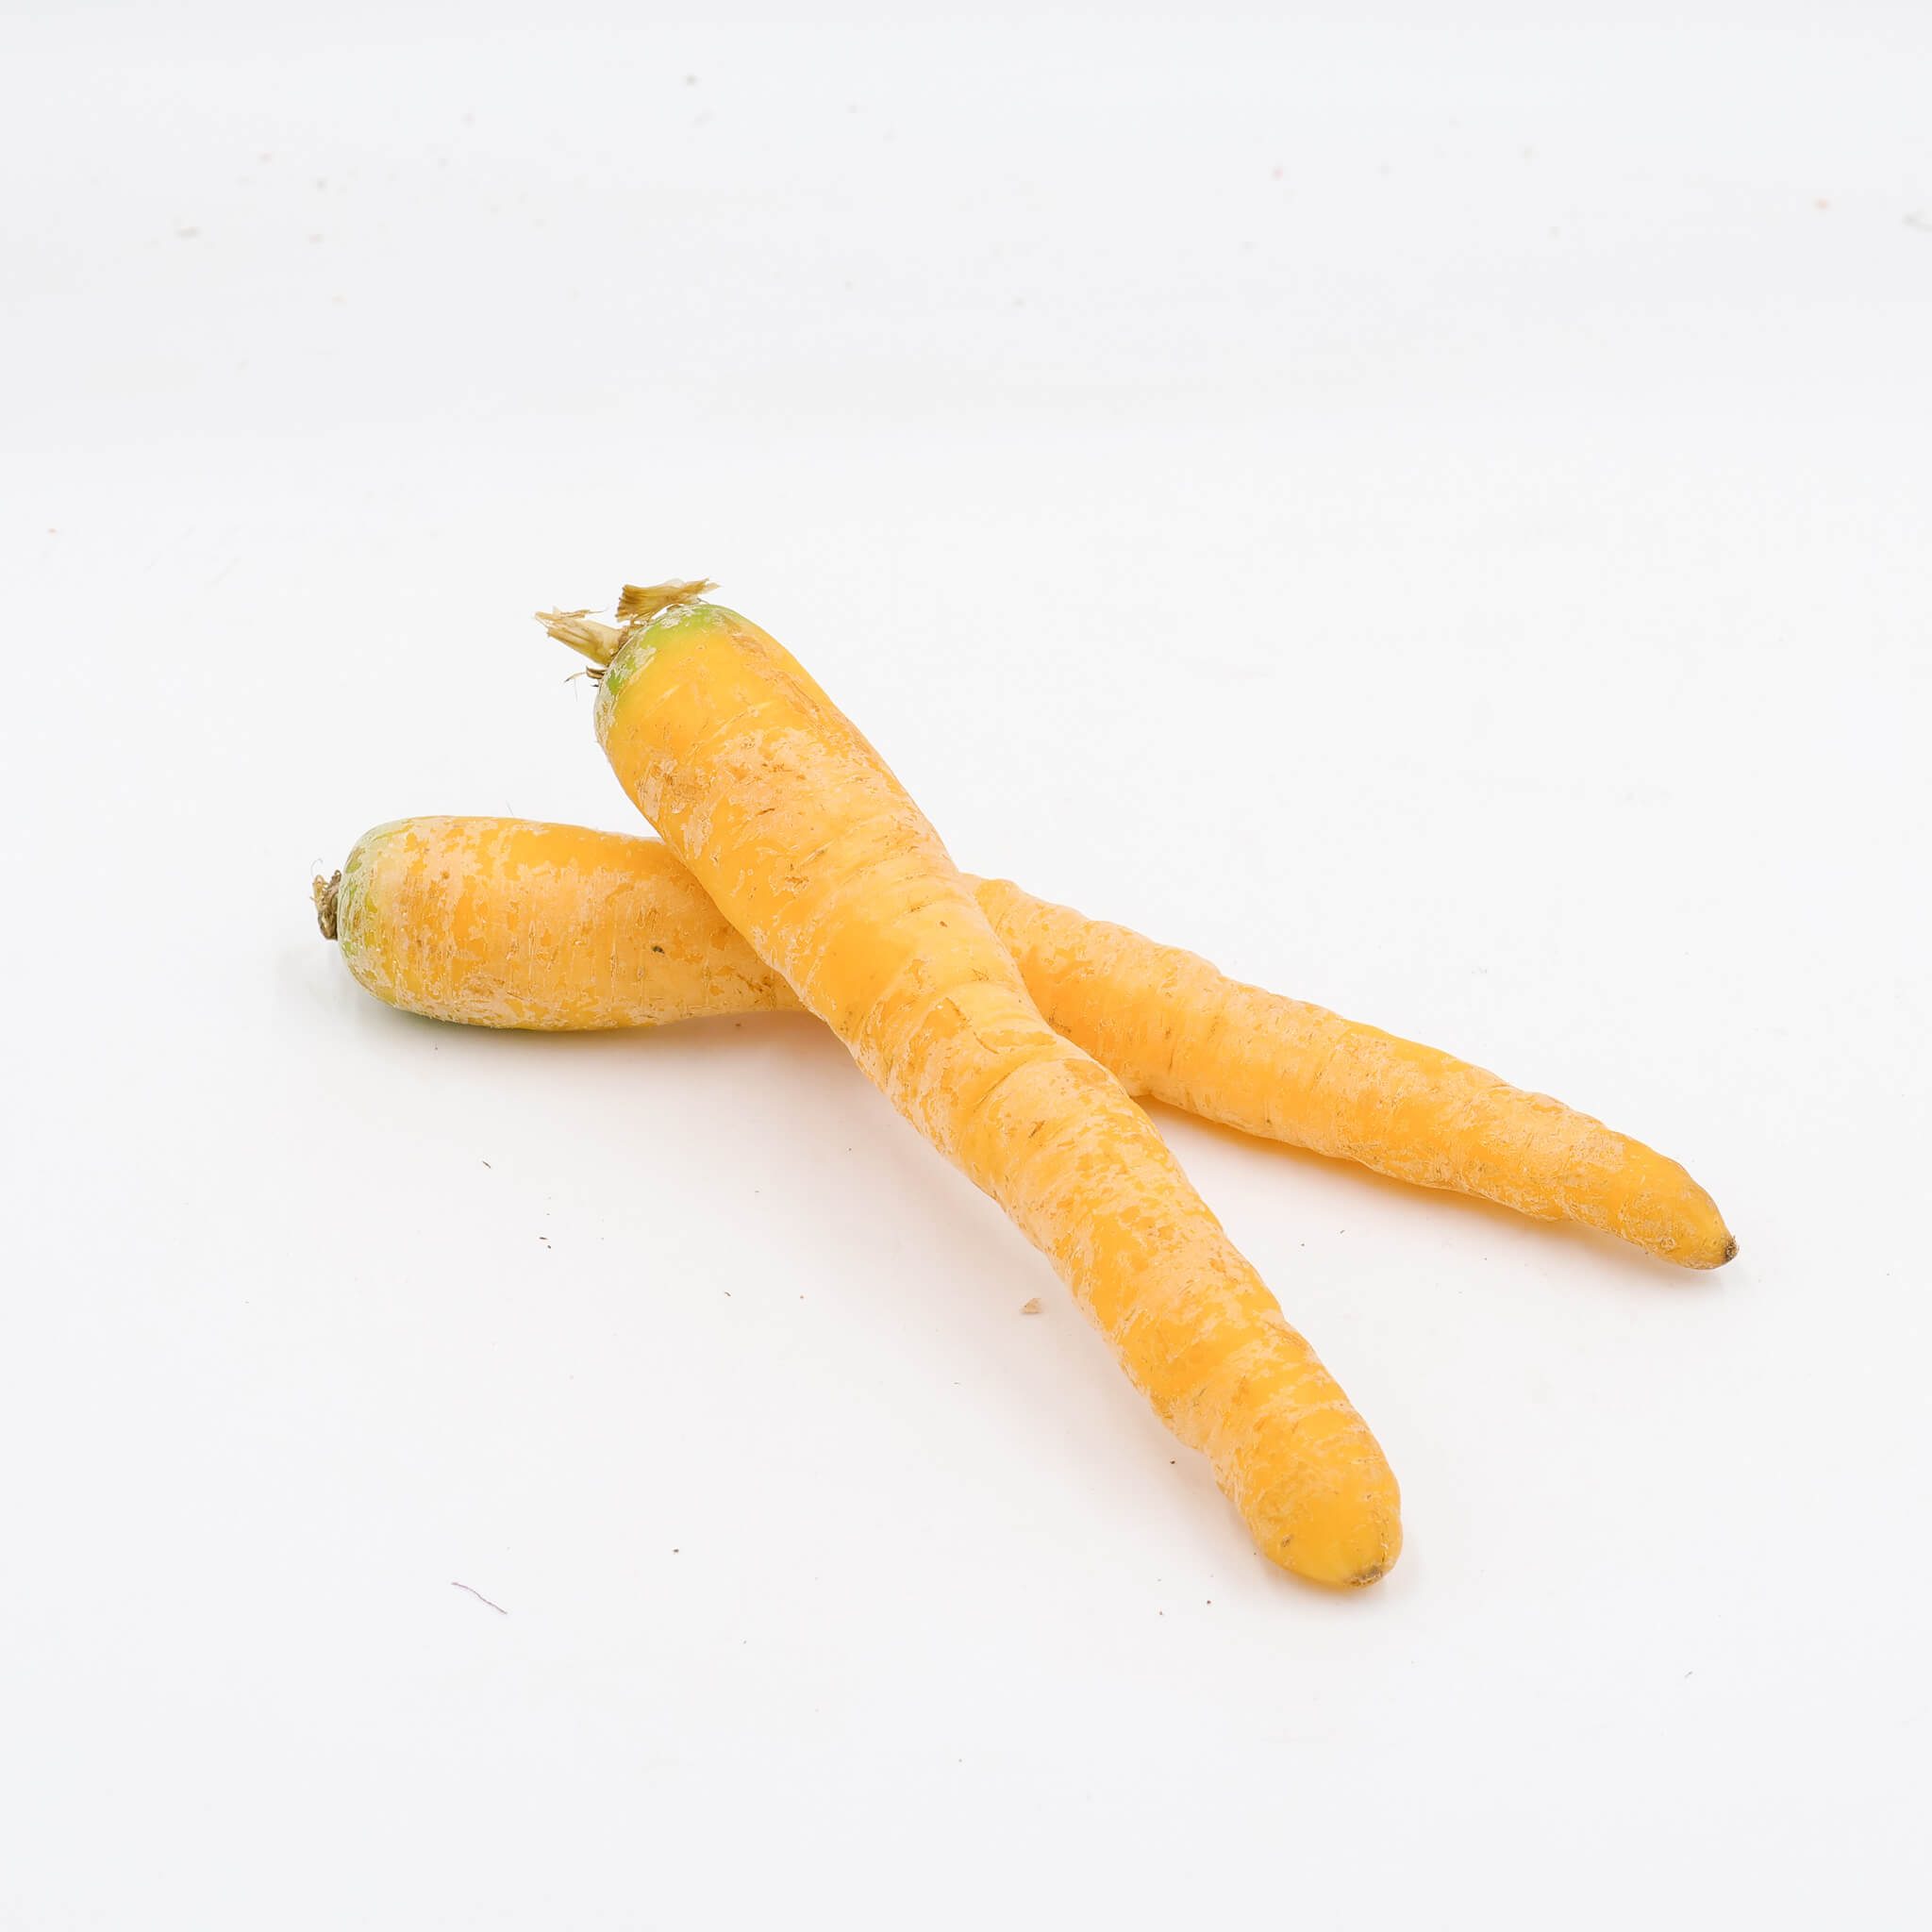 La Légumière, the specialist in Breton and seasonal vegetables! Yellow carrots